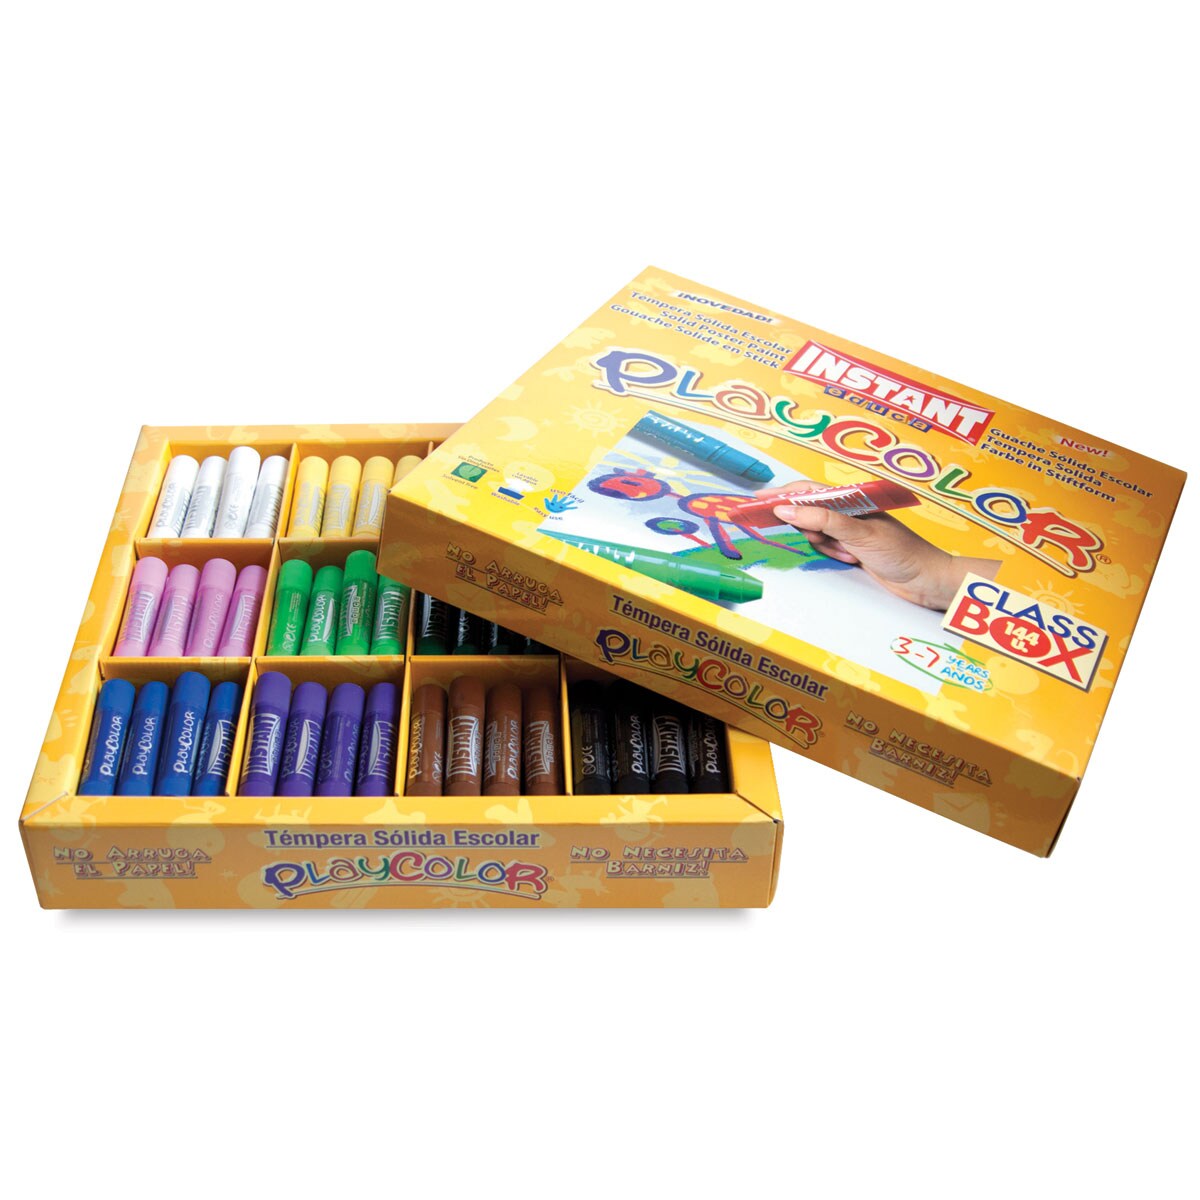 Playcolor - Standard Colors, Set of 144, Standard Size